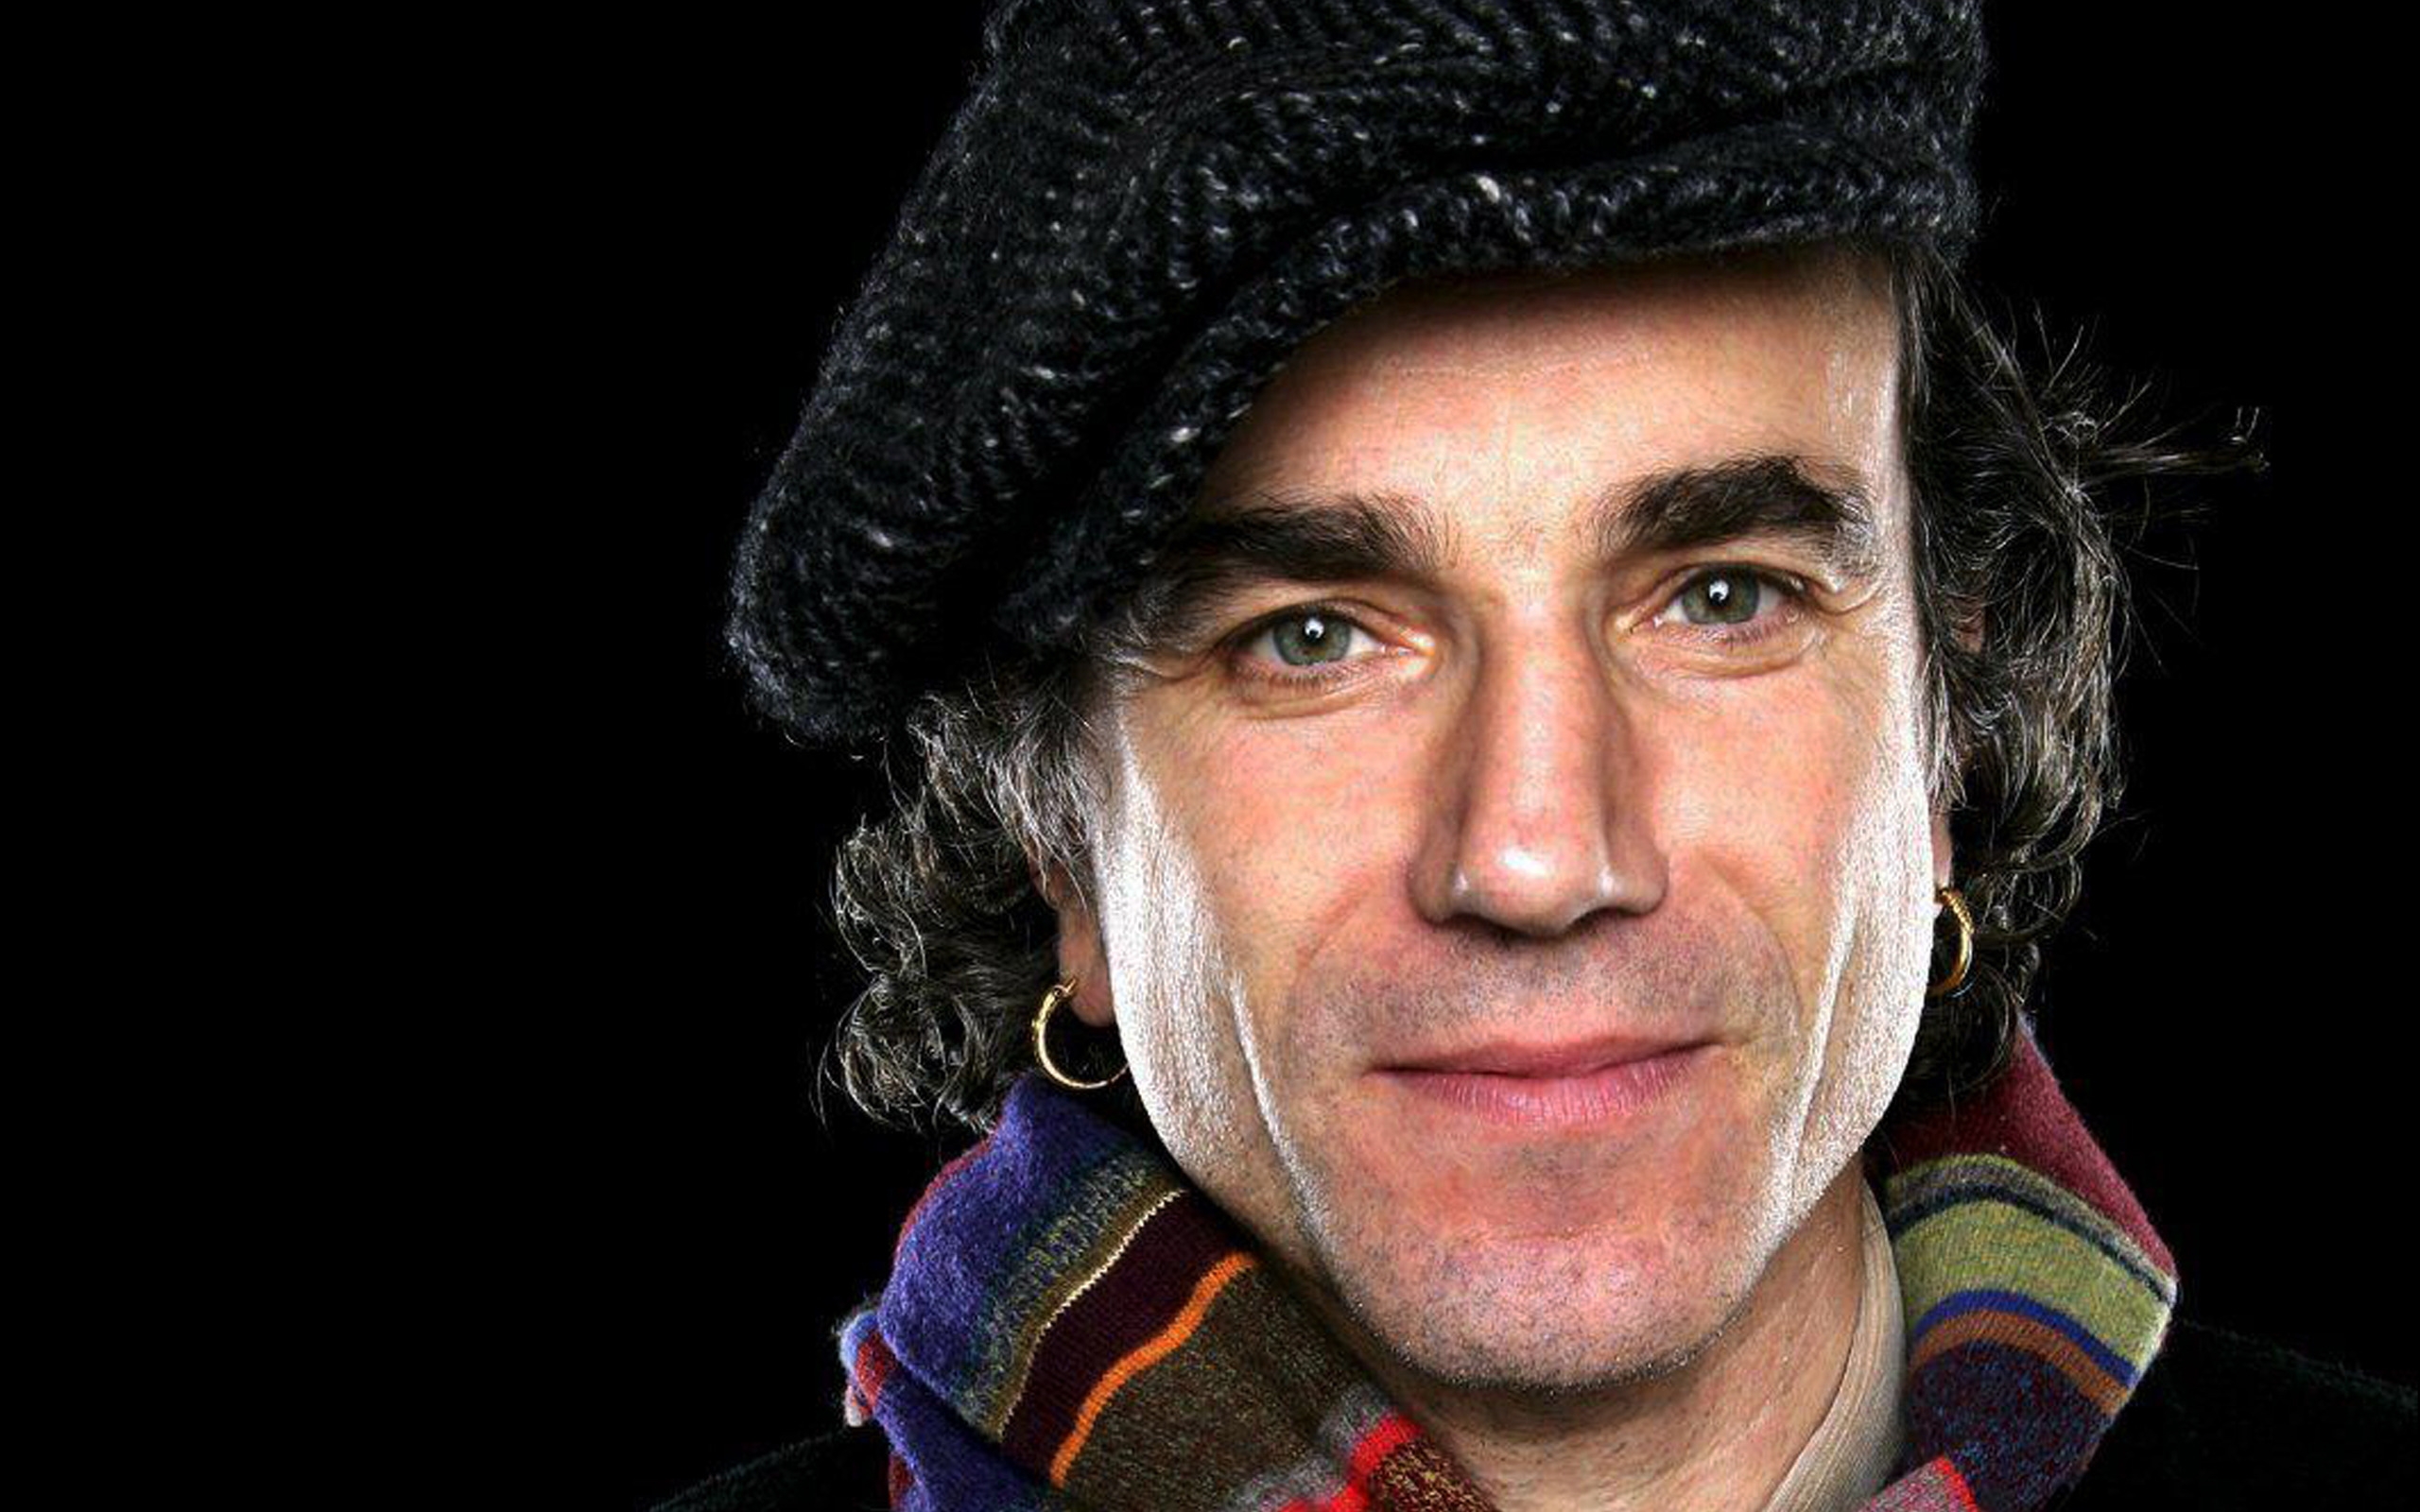 Daniel Day-Lewis for 2560 x 1600 widescreen resolution